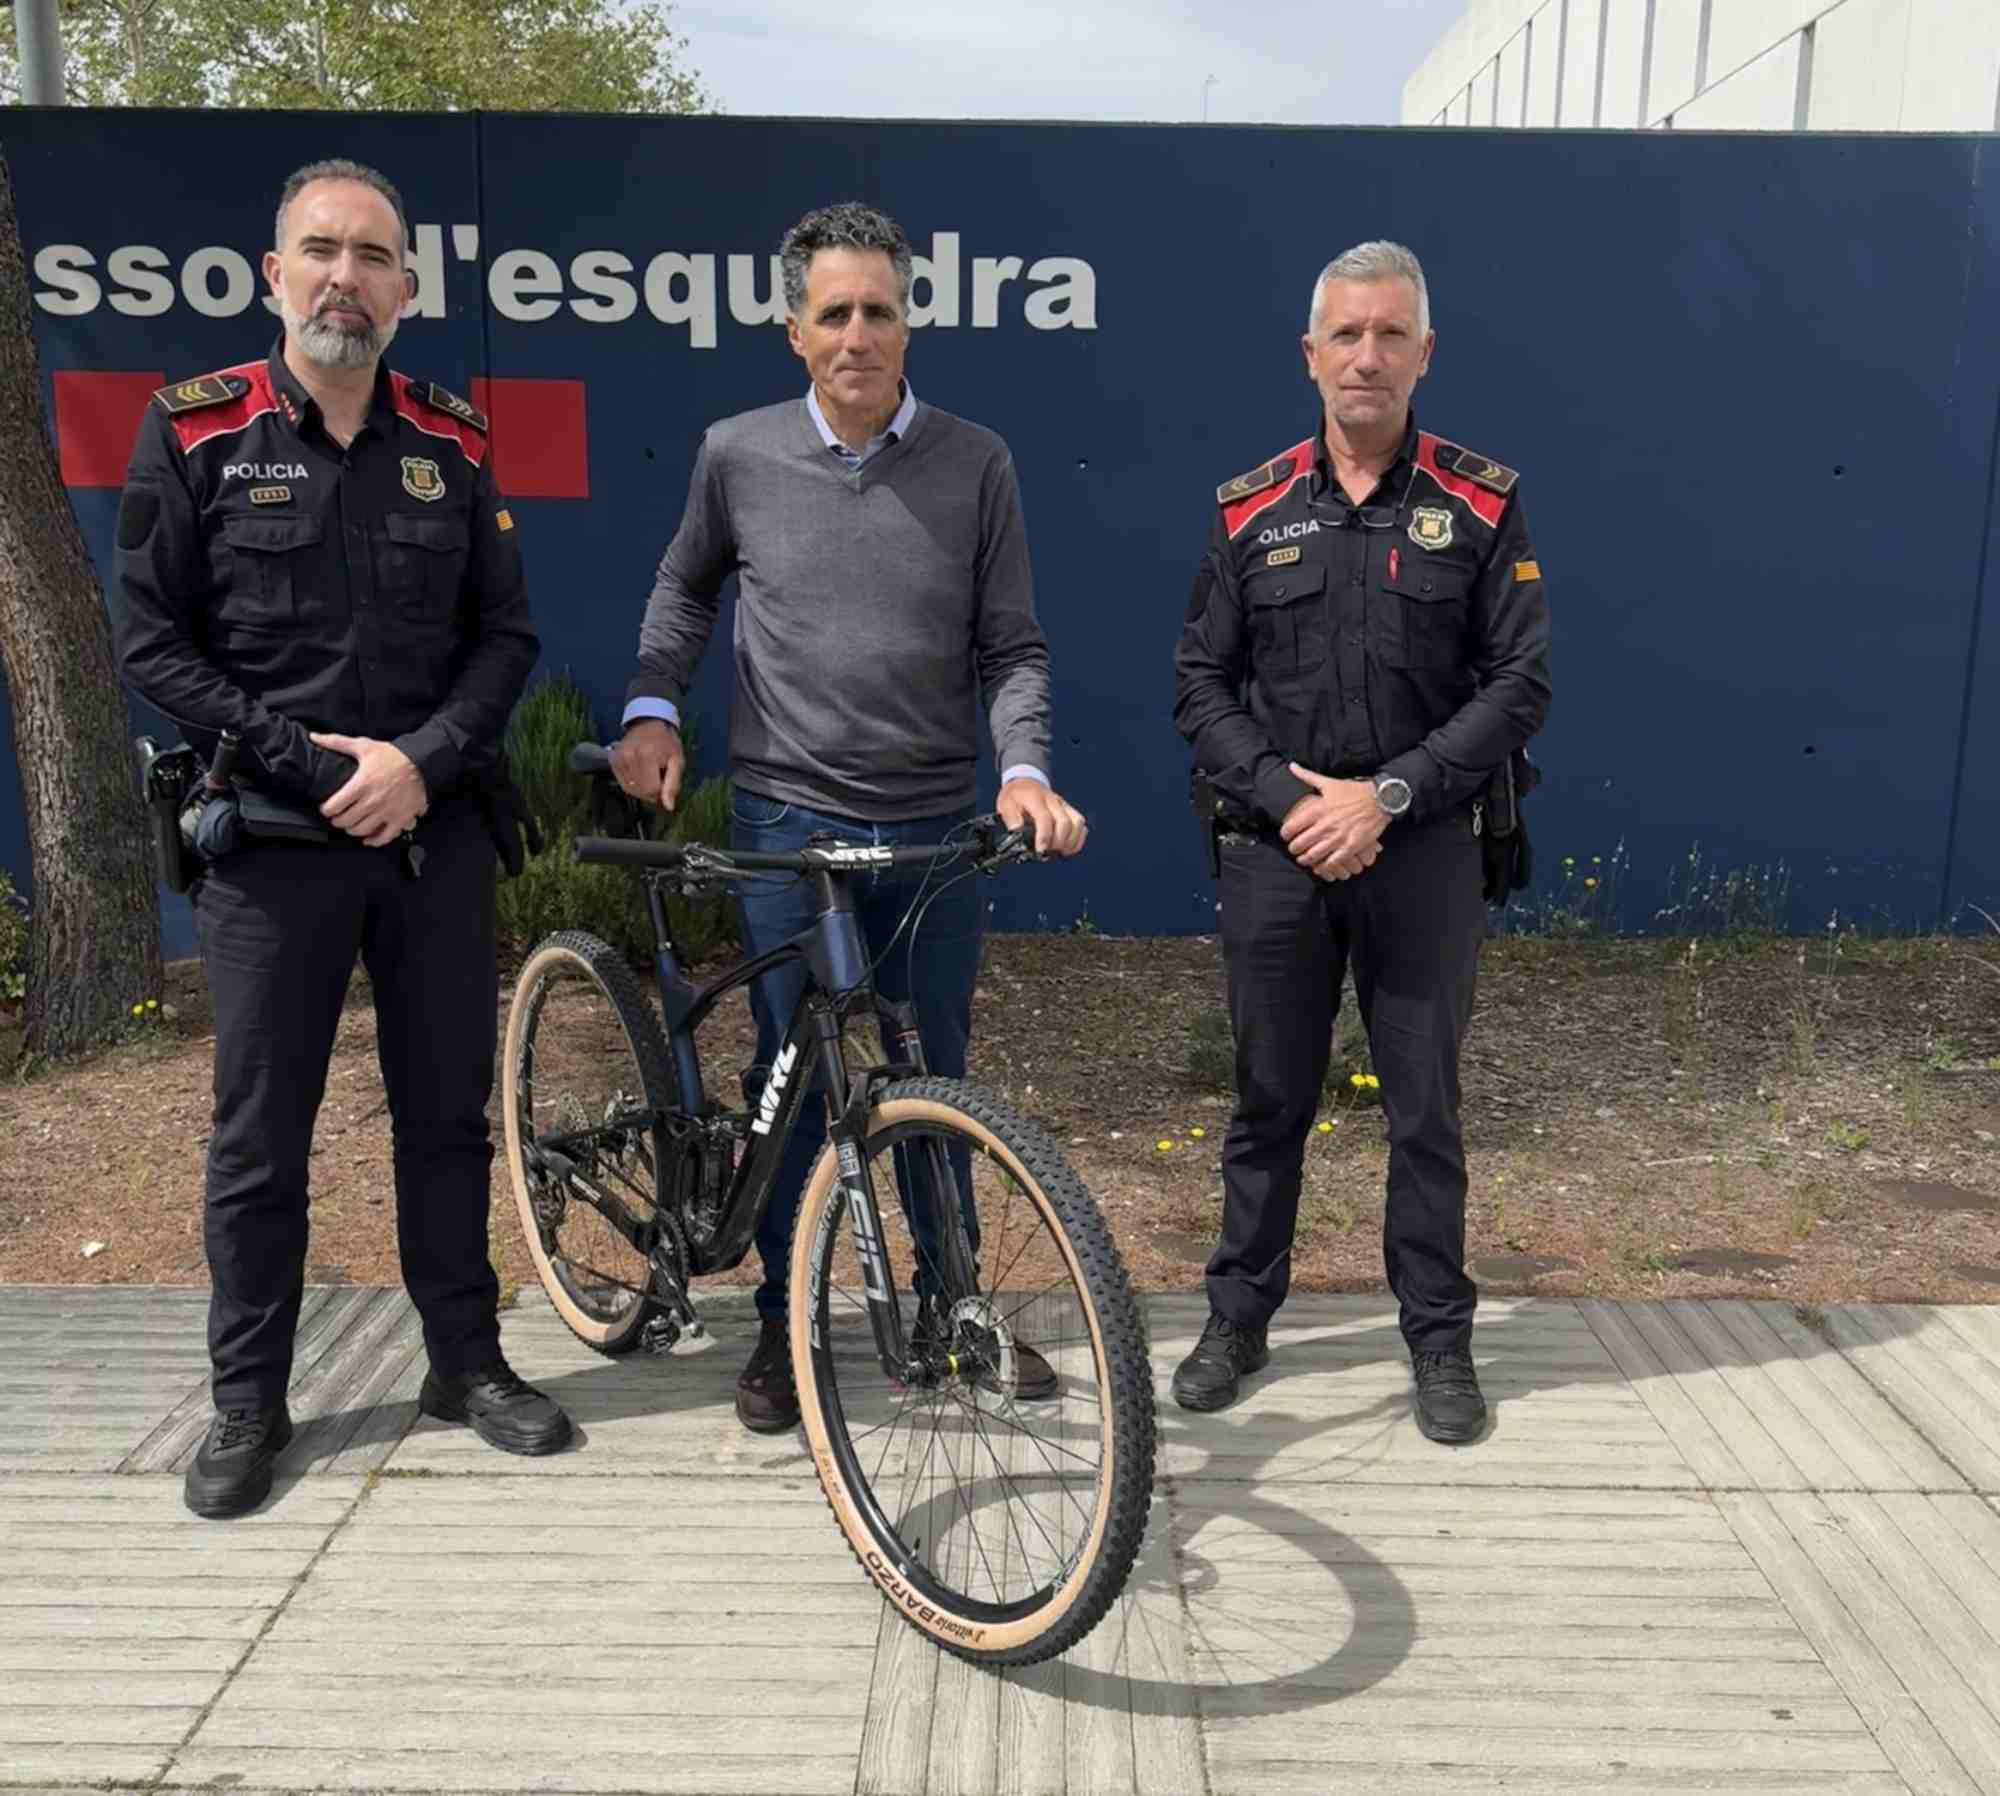 Tour de France legend Induráin gets his stolen bike back: Catalan police charge three teenagers